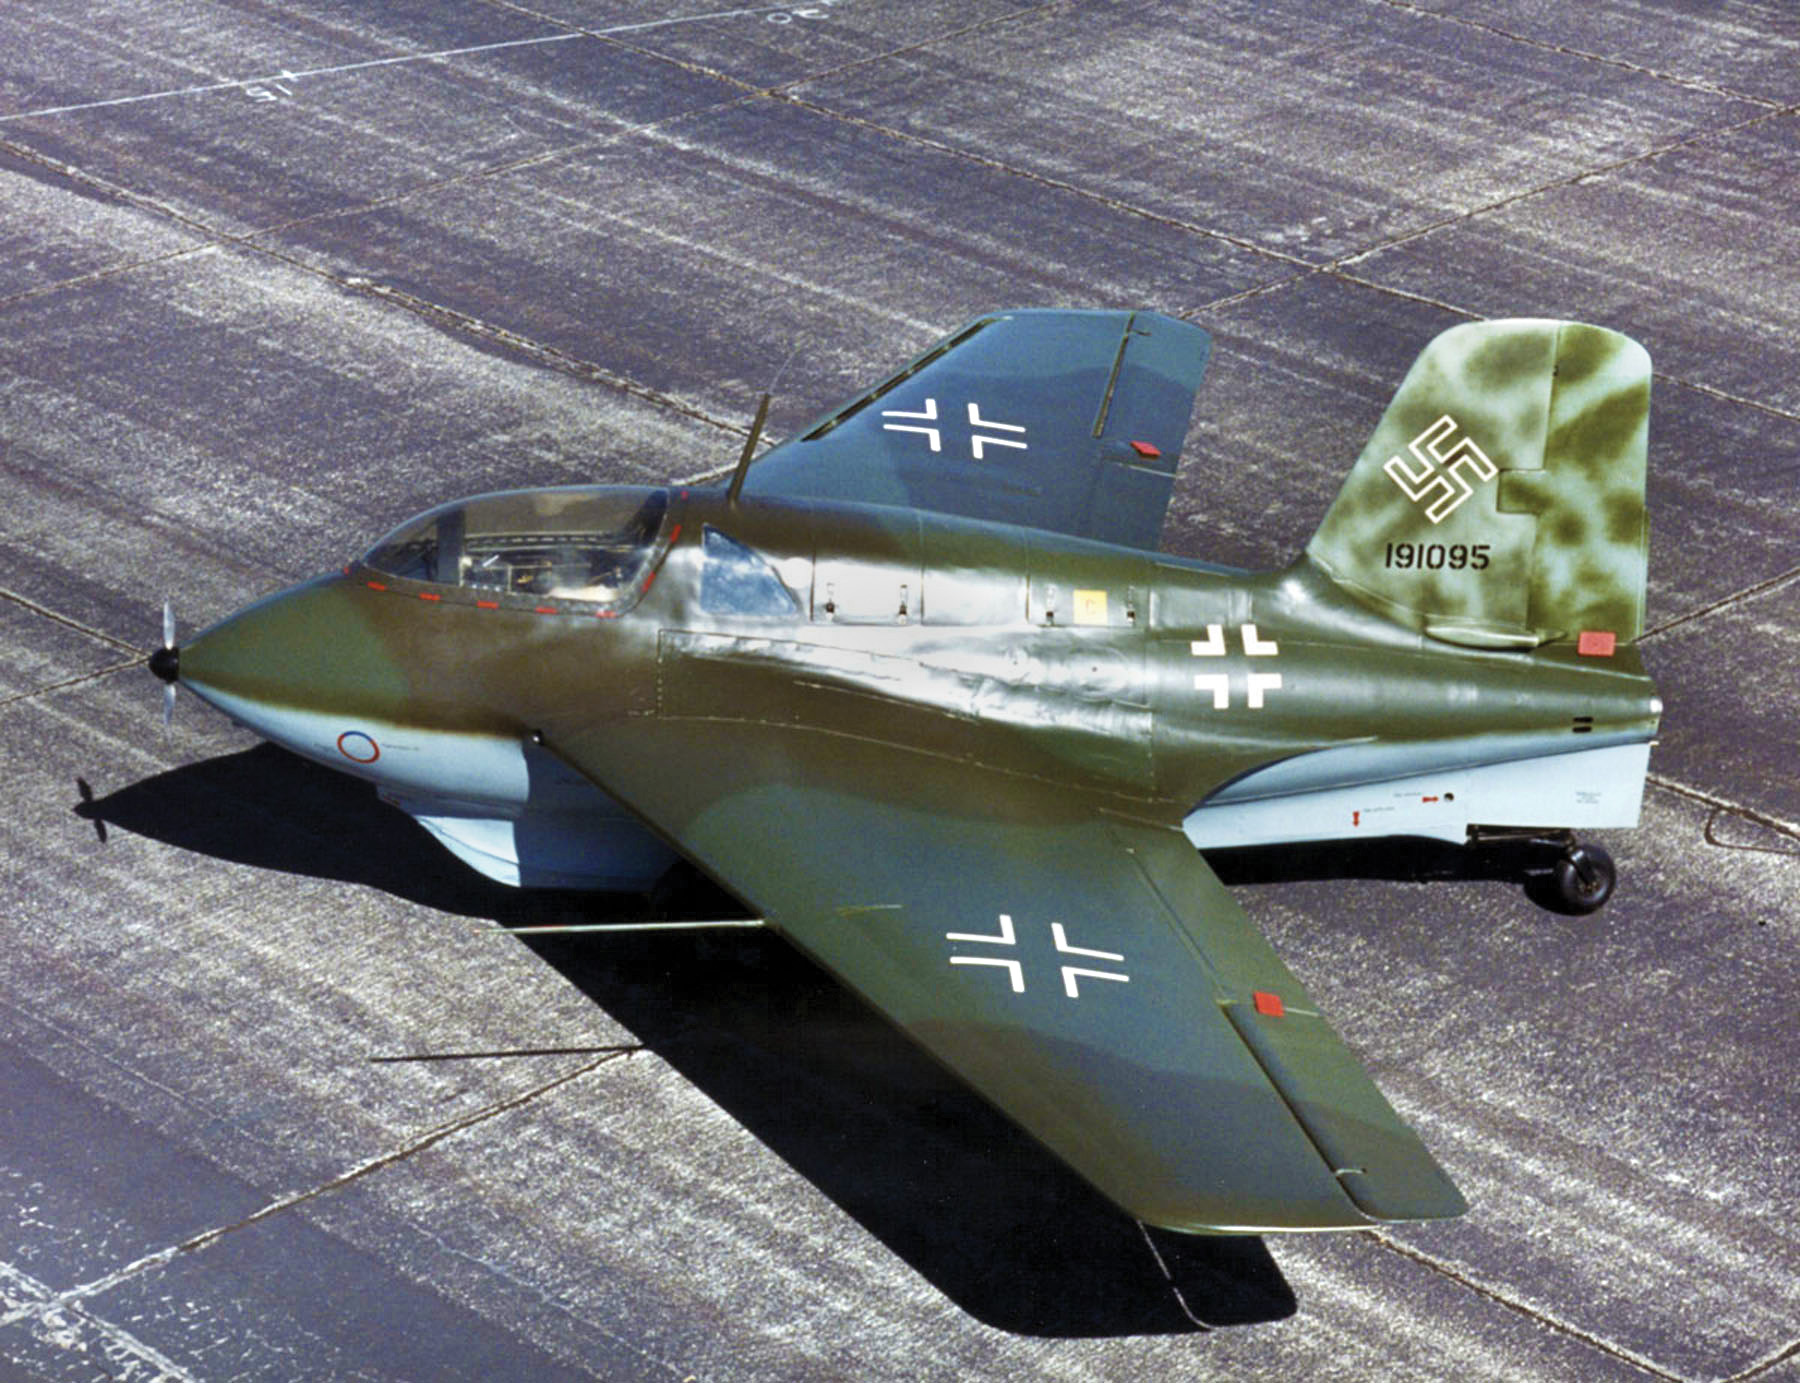 This Me-163B Komet, in the collection of the U.S. Air Force, bears evidence of sabotage, as forced laborers apparently used contaminated glue in the wing structure and lodged a rock between the volatile fuel tank and a support strap.